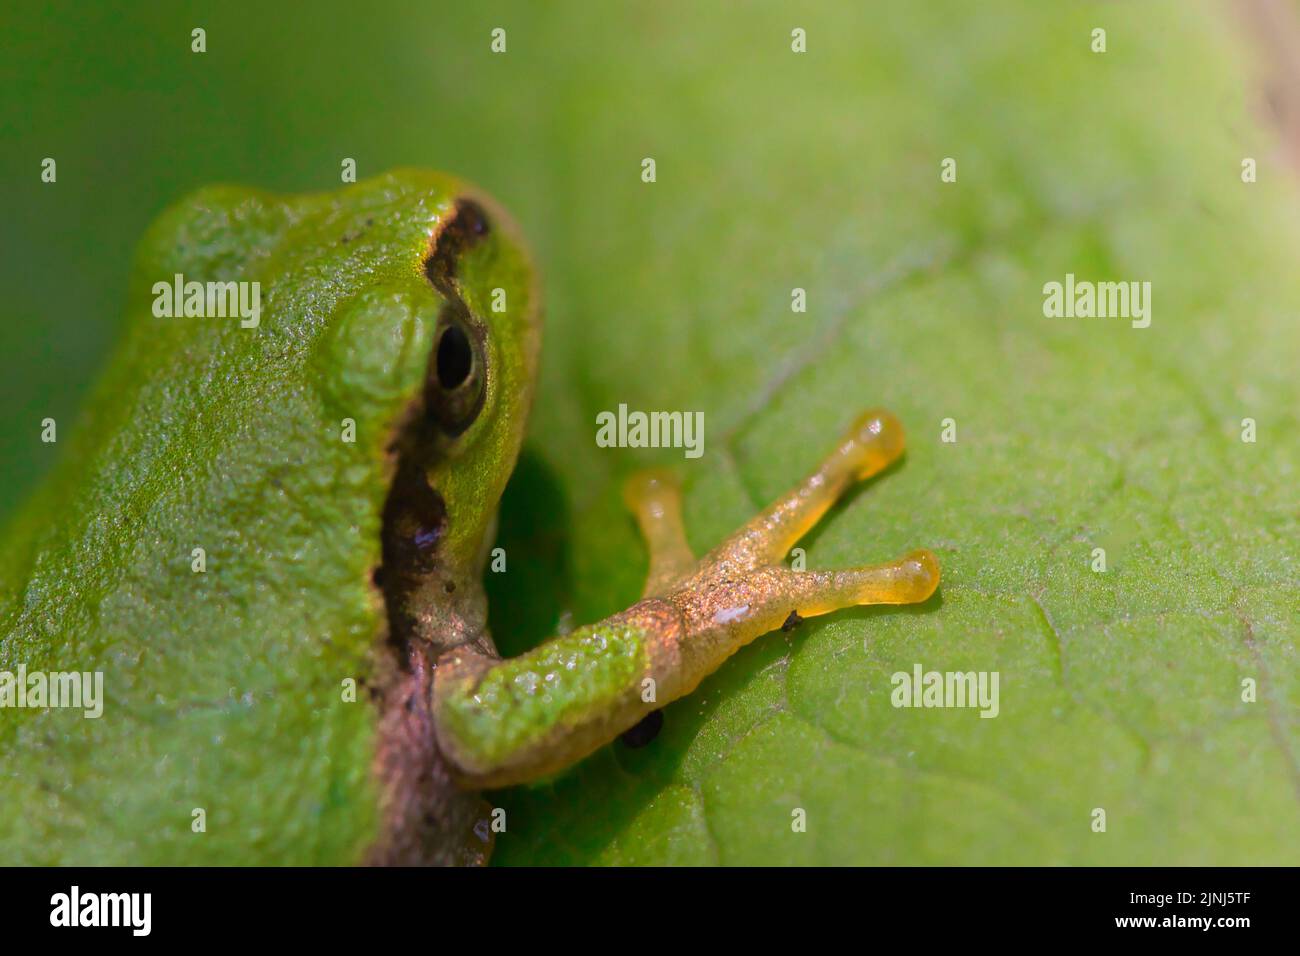 Japanese tree frog on a leaf Stock Photo